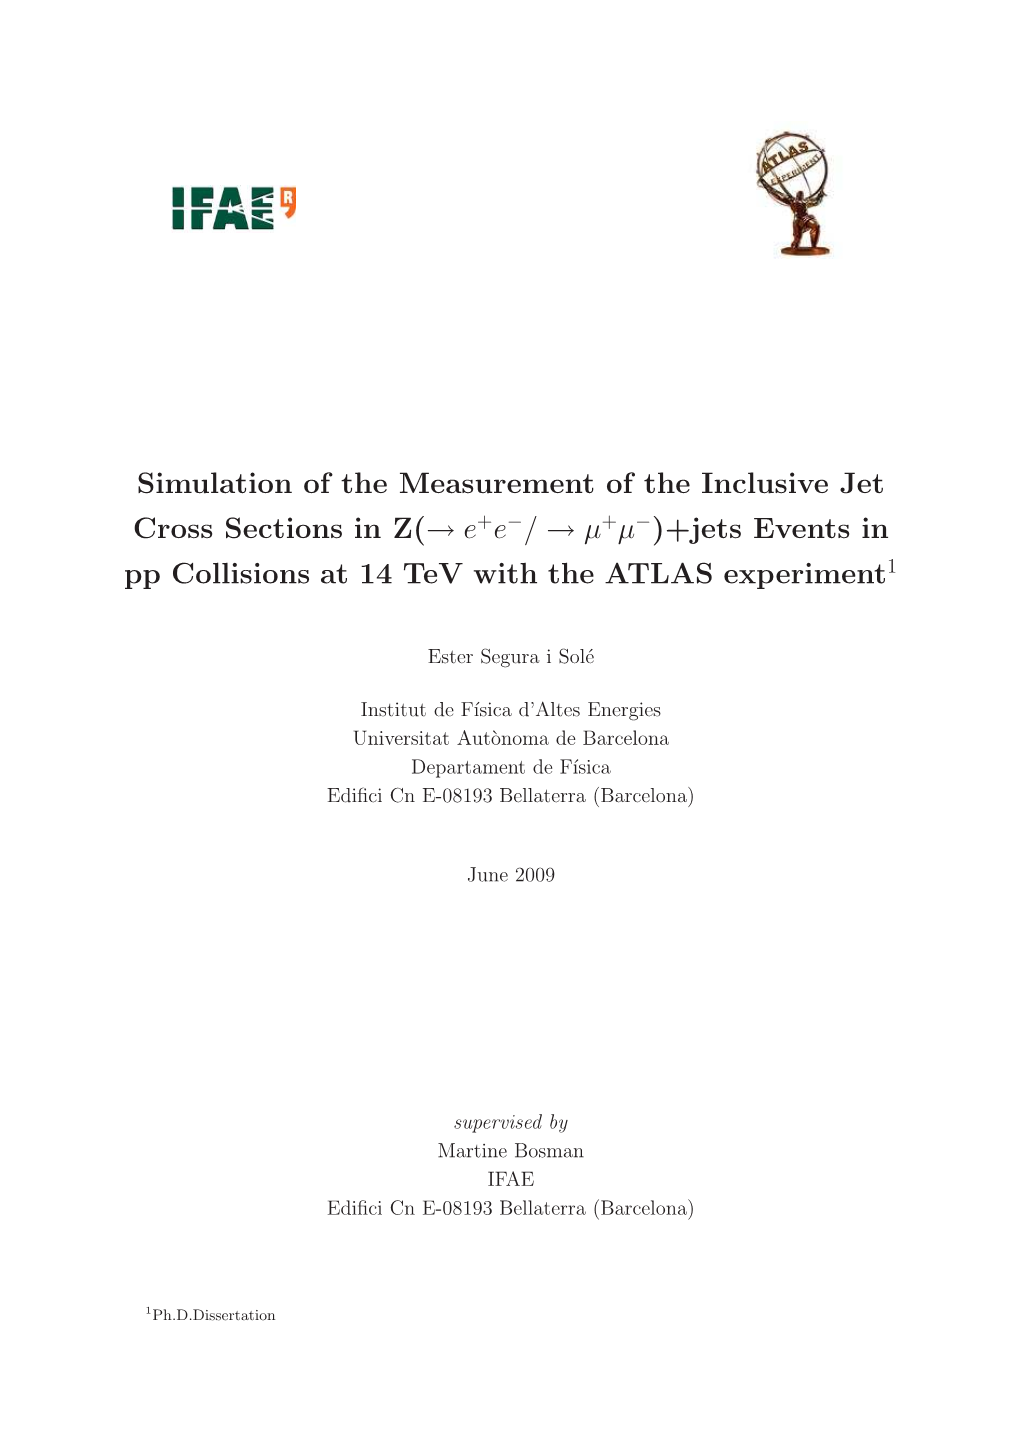 Simulation of the Measurement of the Inclusive Jet Cross Sectionsin Z(→E